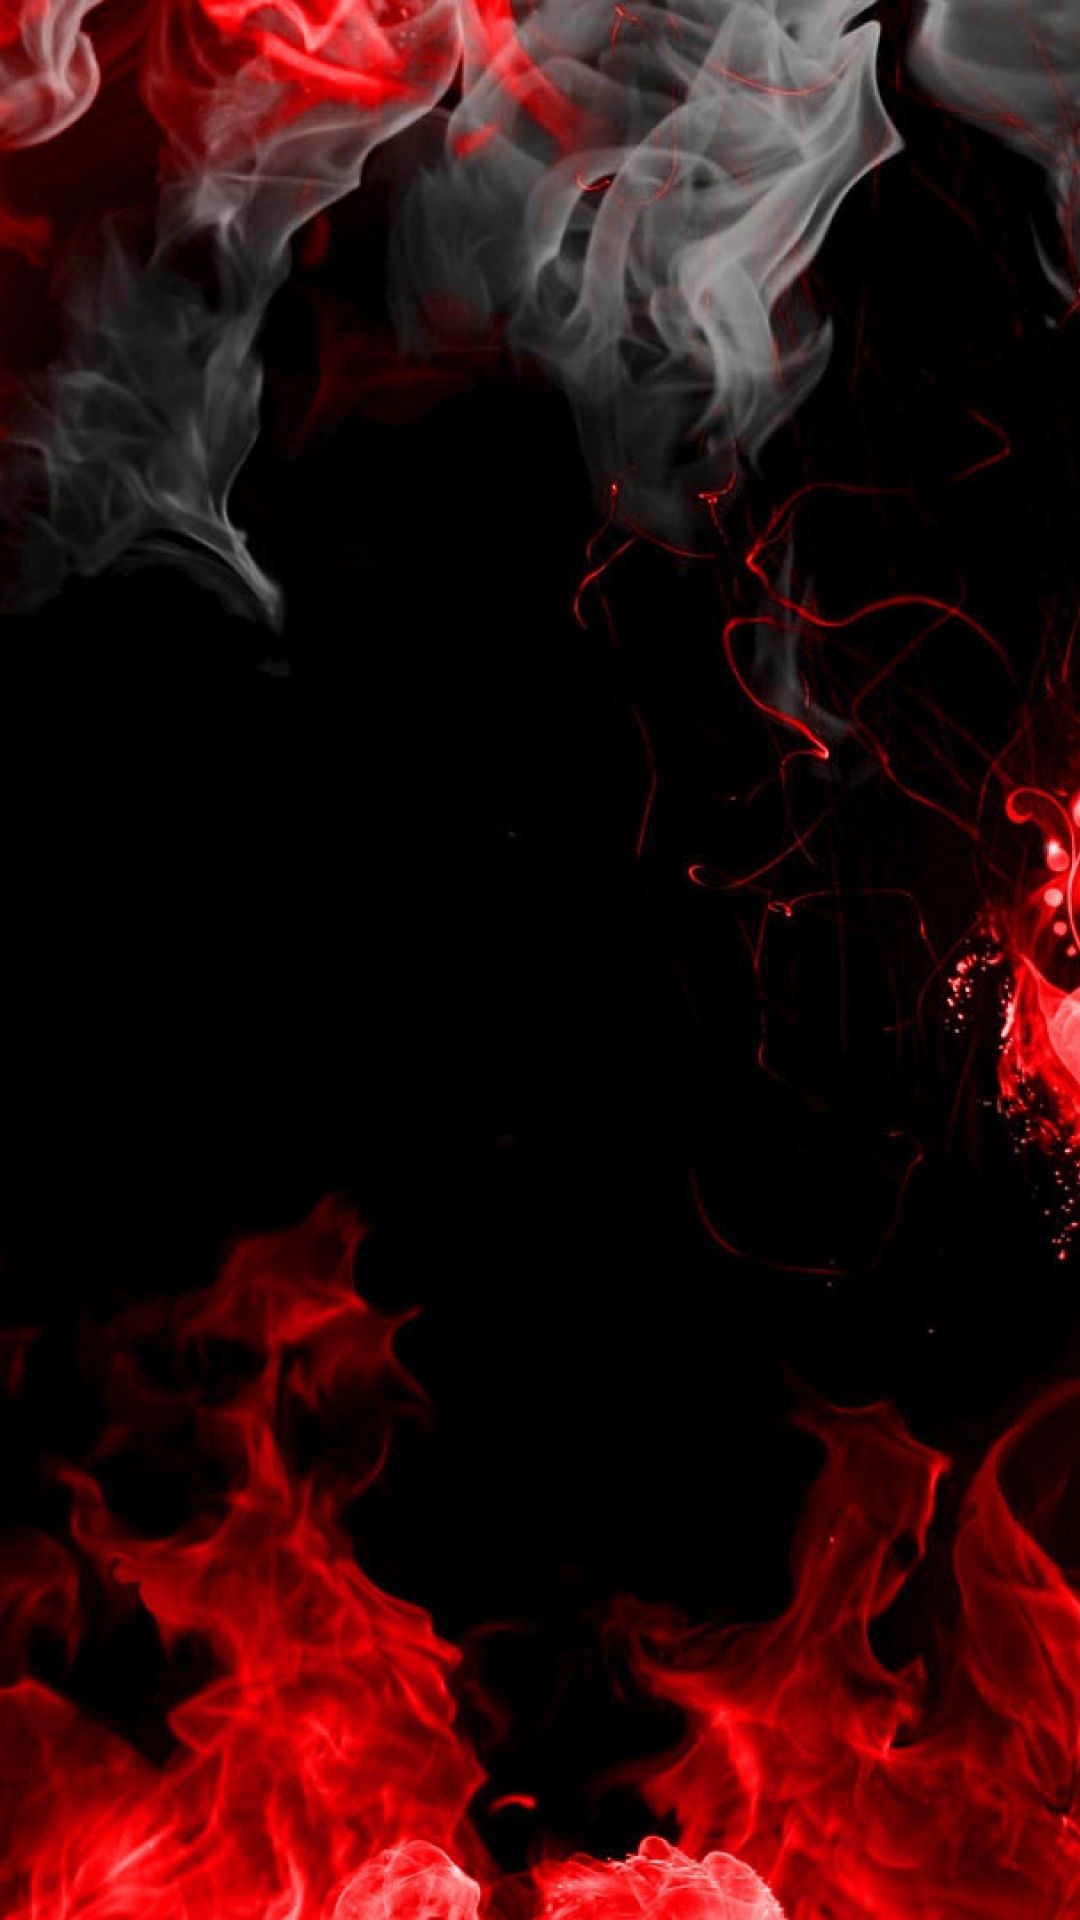 Free download Download Wallpaper 3840x2160 abstraction red smoke